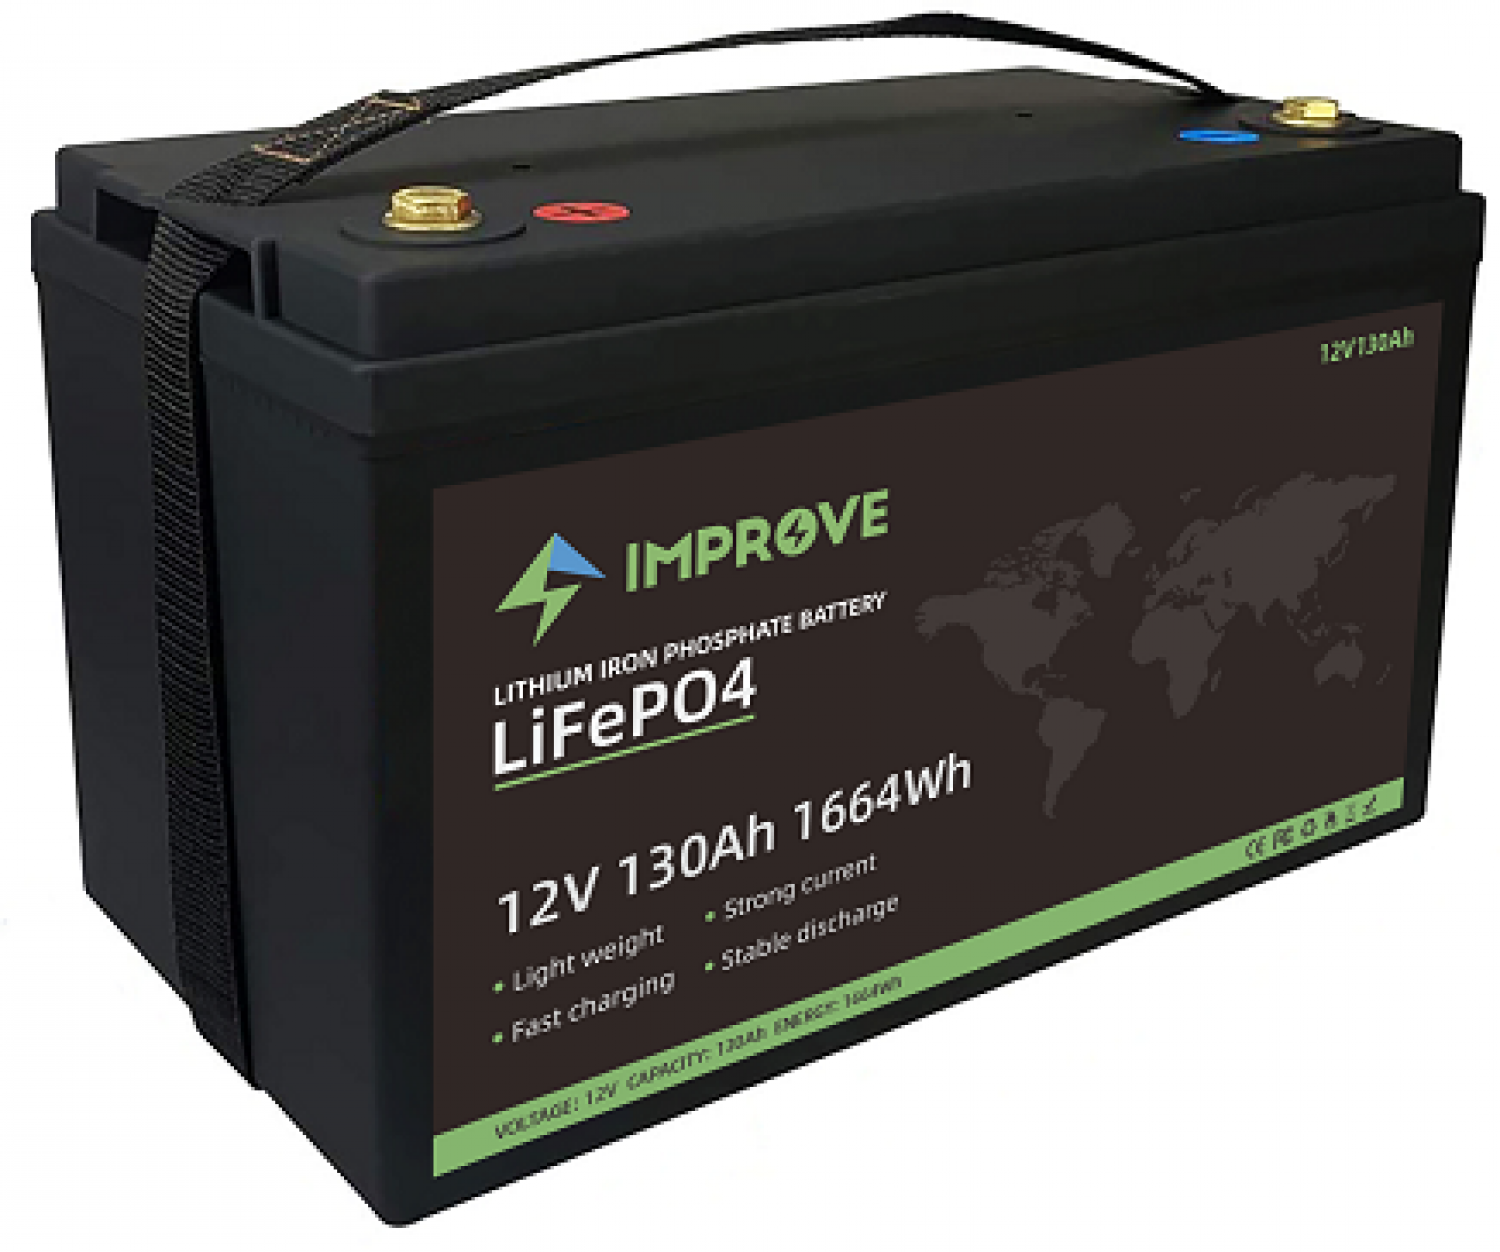 IMPROVE lifepo4 battery pack